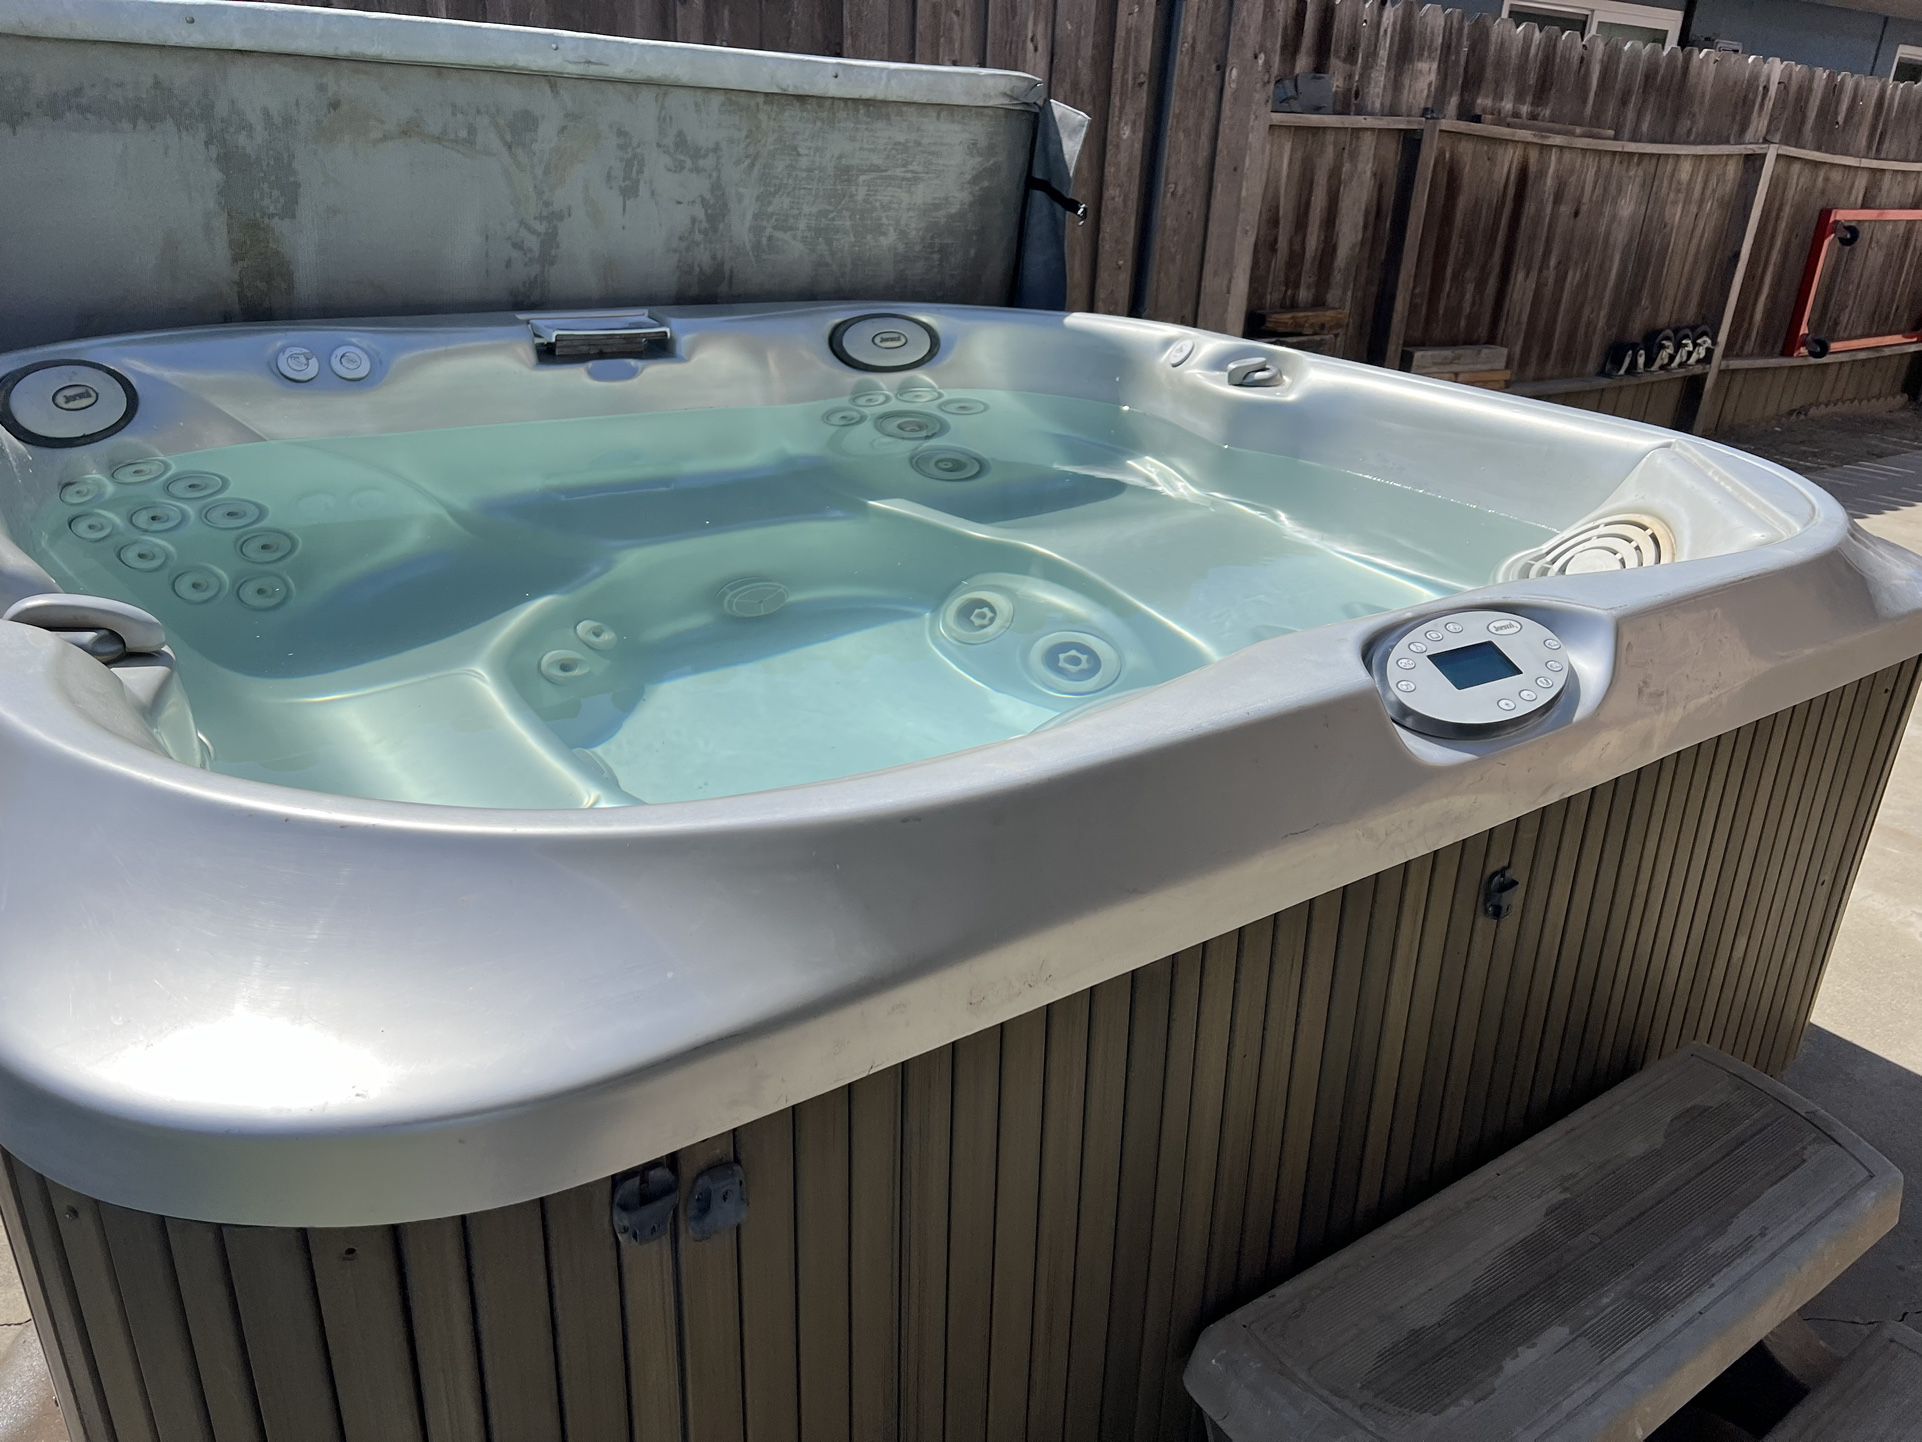 Jacuzzi 6 Person Spa. Cover Lifter. LED Light. Lounge. Waterfall